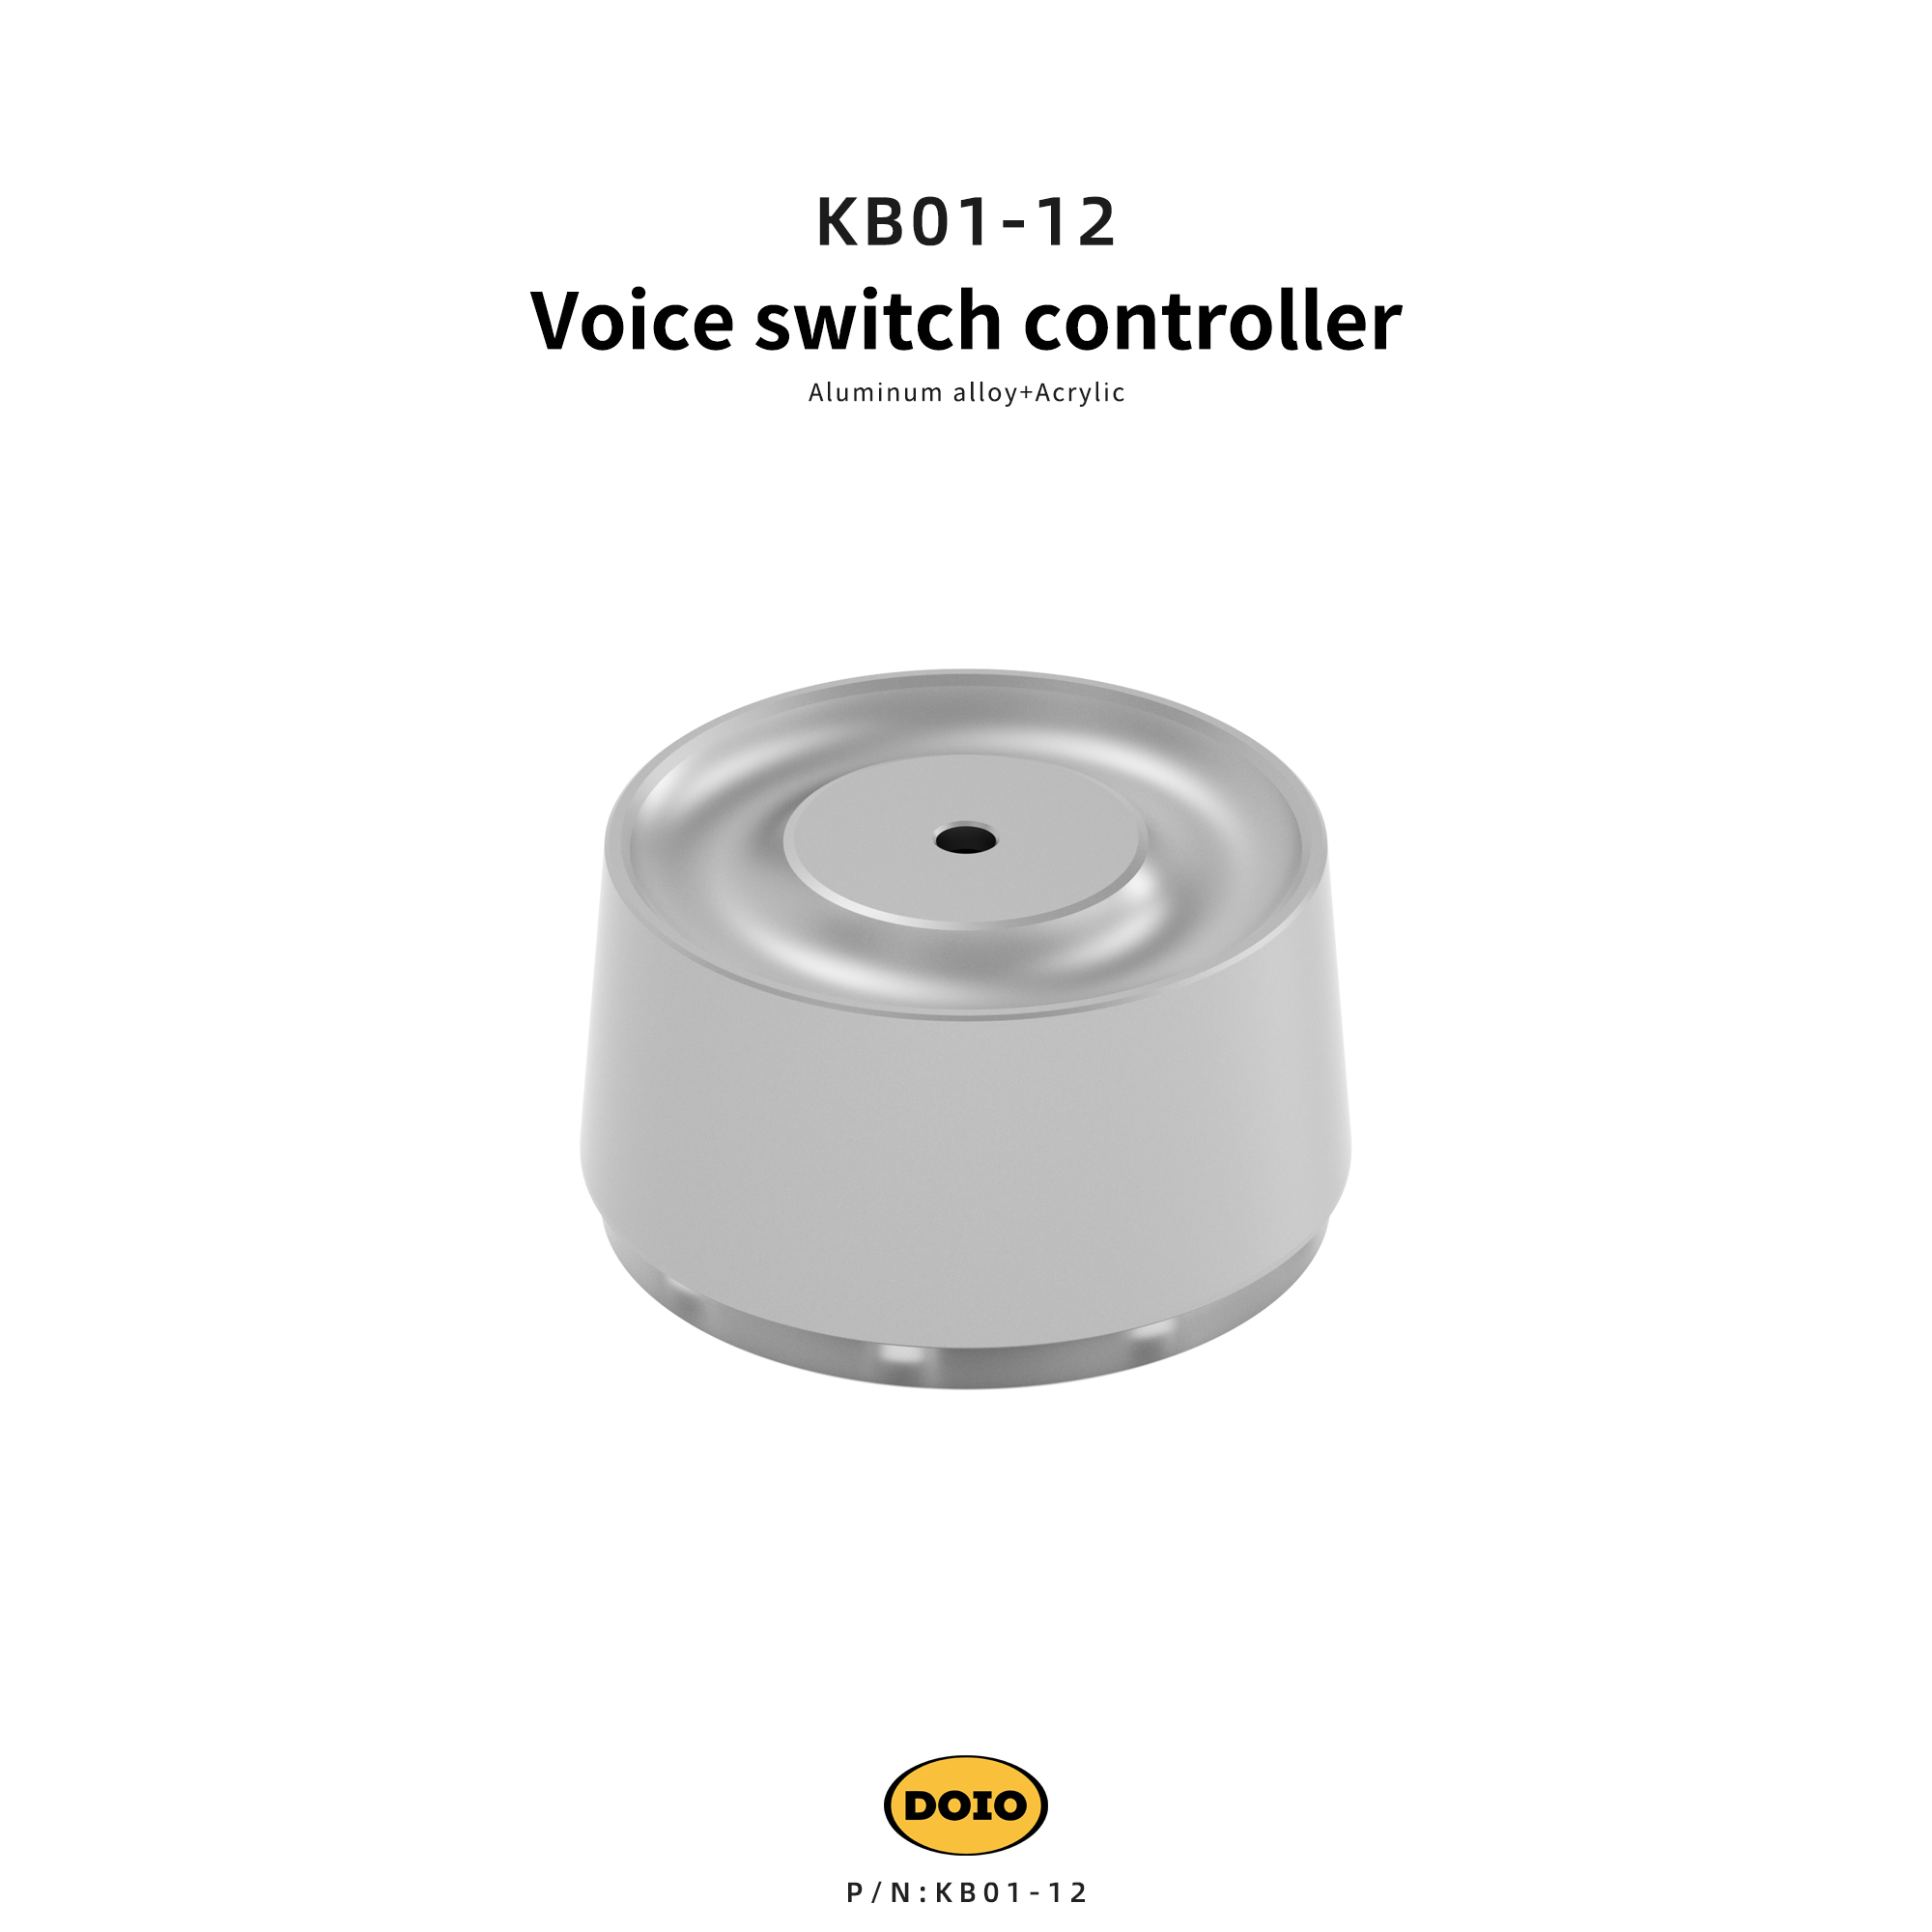 Voice switch controller